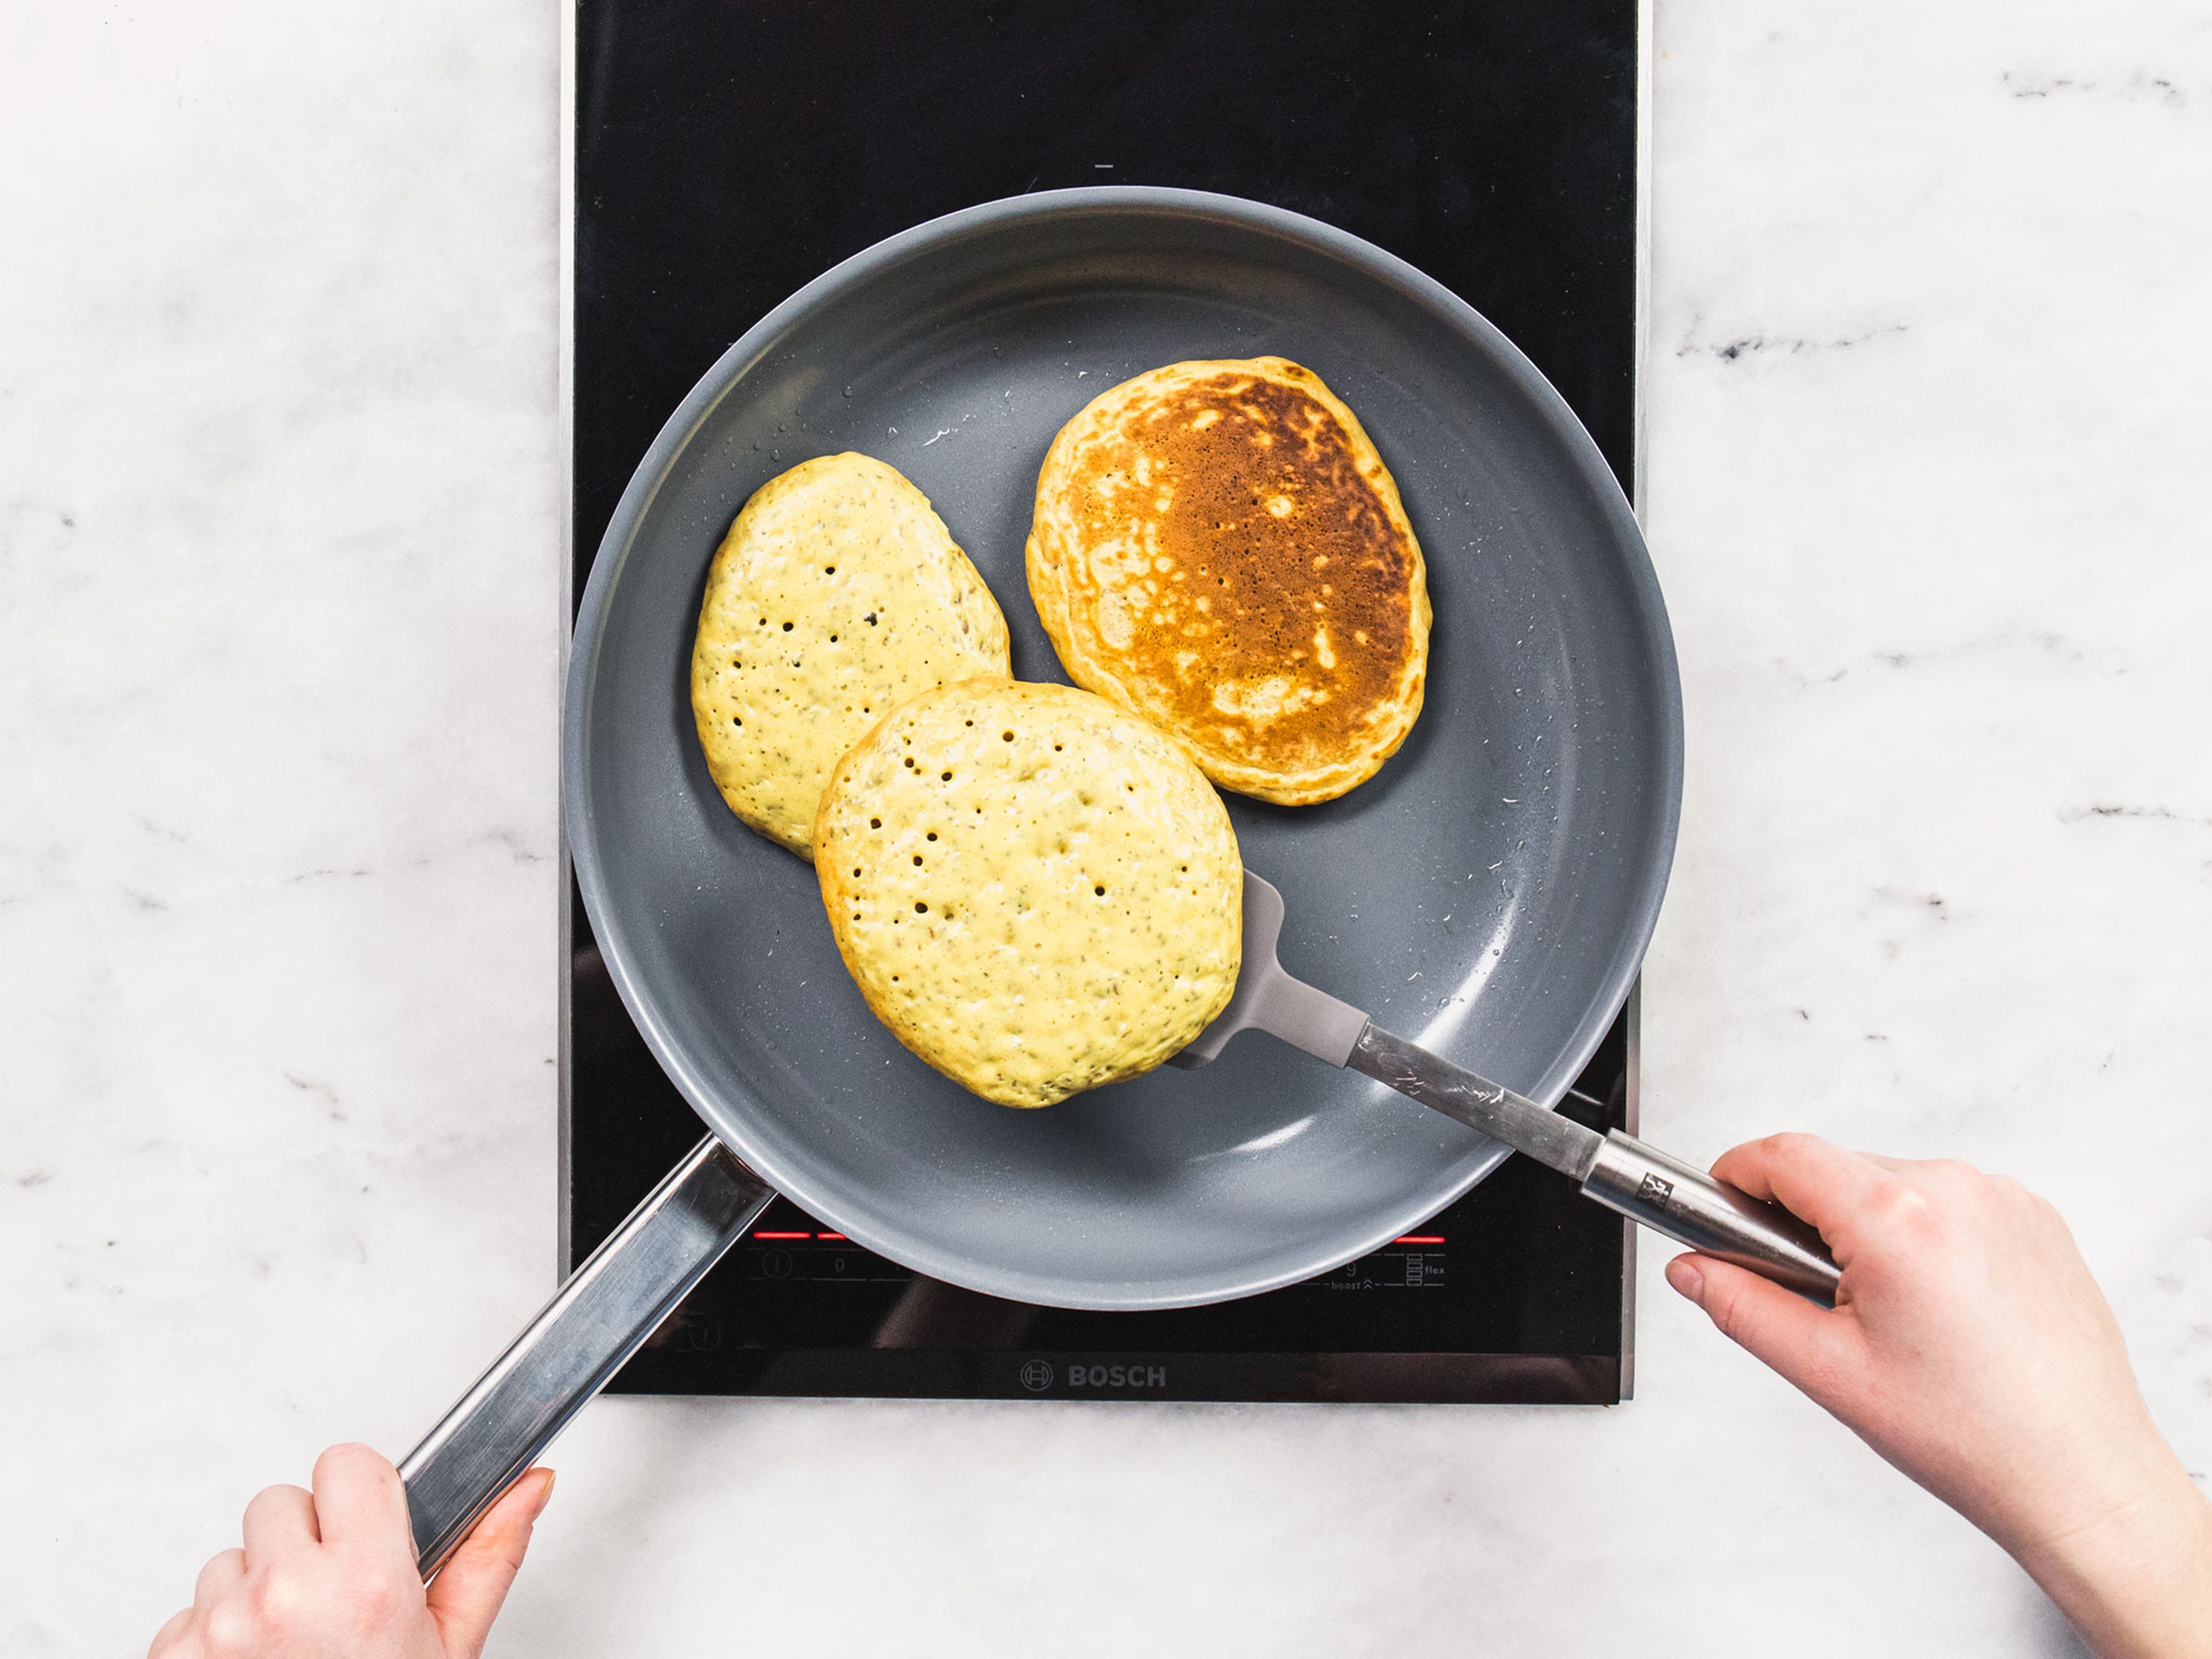 Add some vegetable oil to a pan over medium heat. Then add a few large spoonfuls of batter to make individual pancakes. When bubbles appear on the top of pancakes, flip them and let cook for another 2 min., or until cooked through. Repeat until no batter remains.